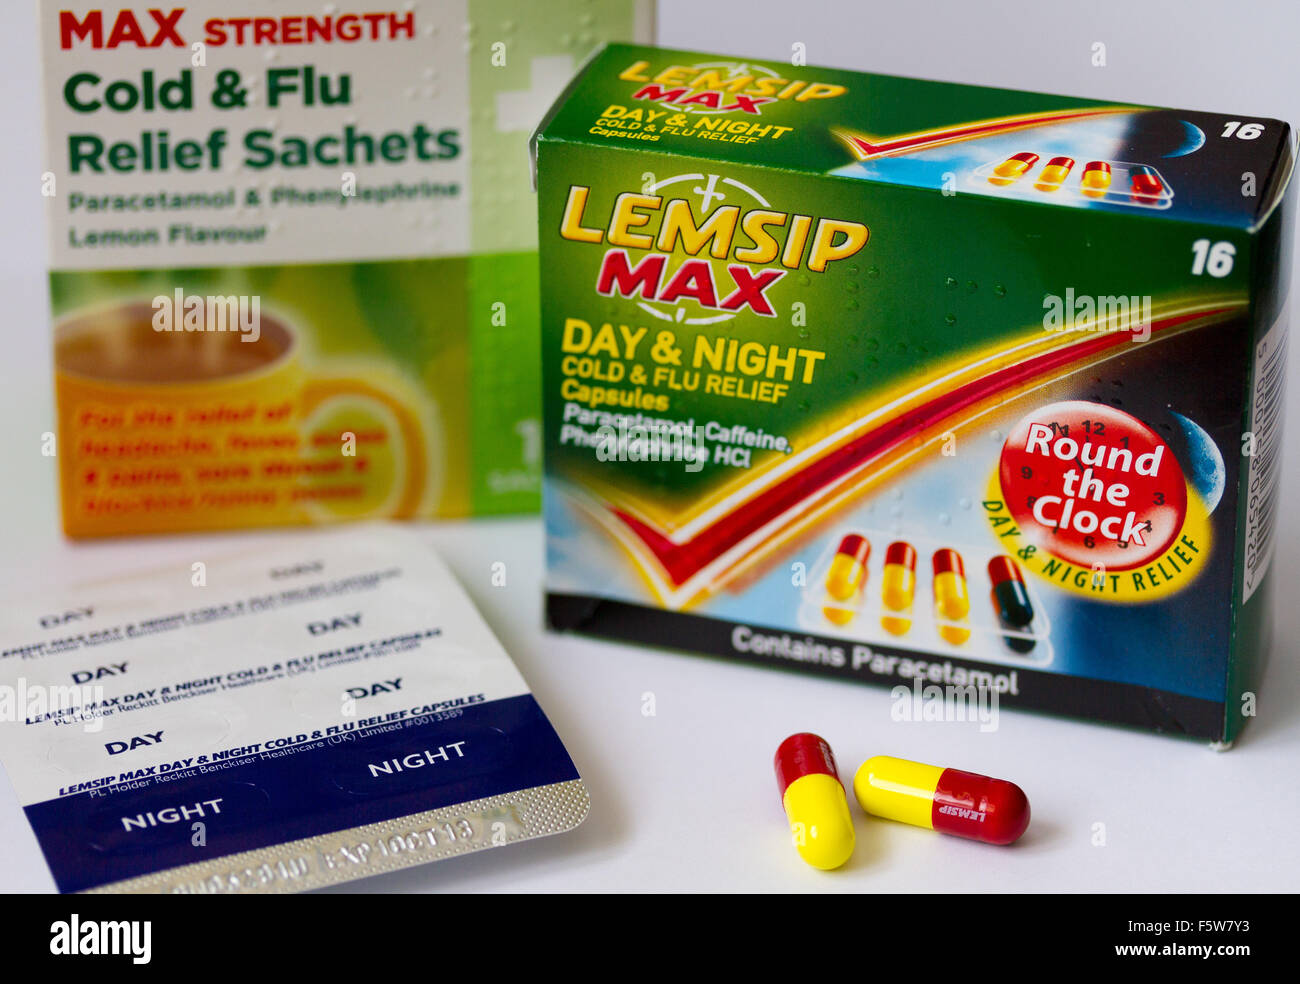 Lemsip capsules and cold and flu relief sachets Stock Photo